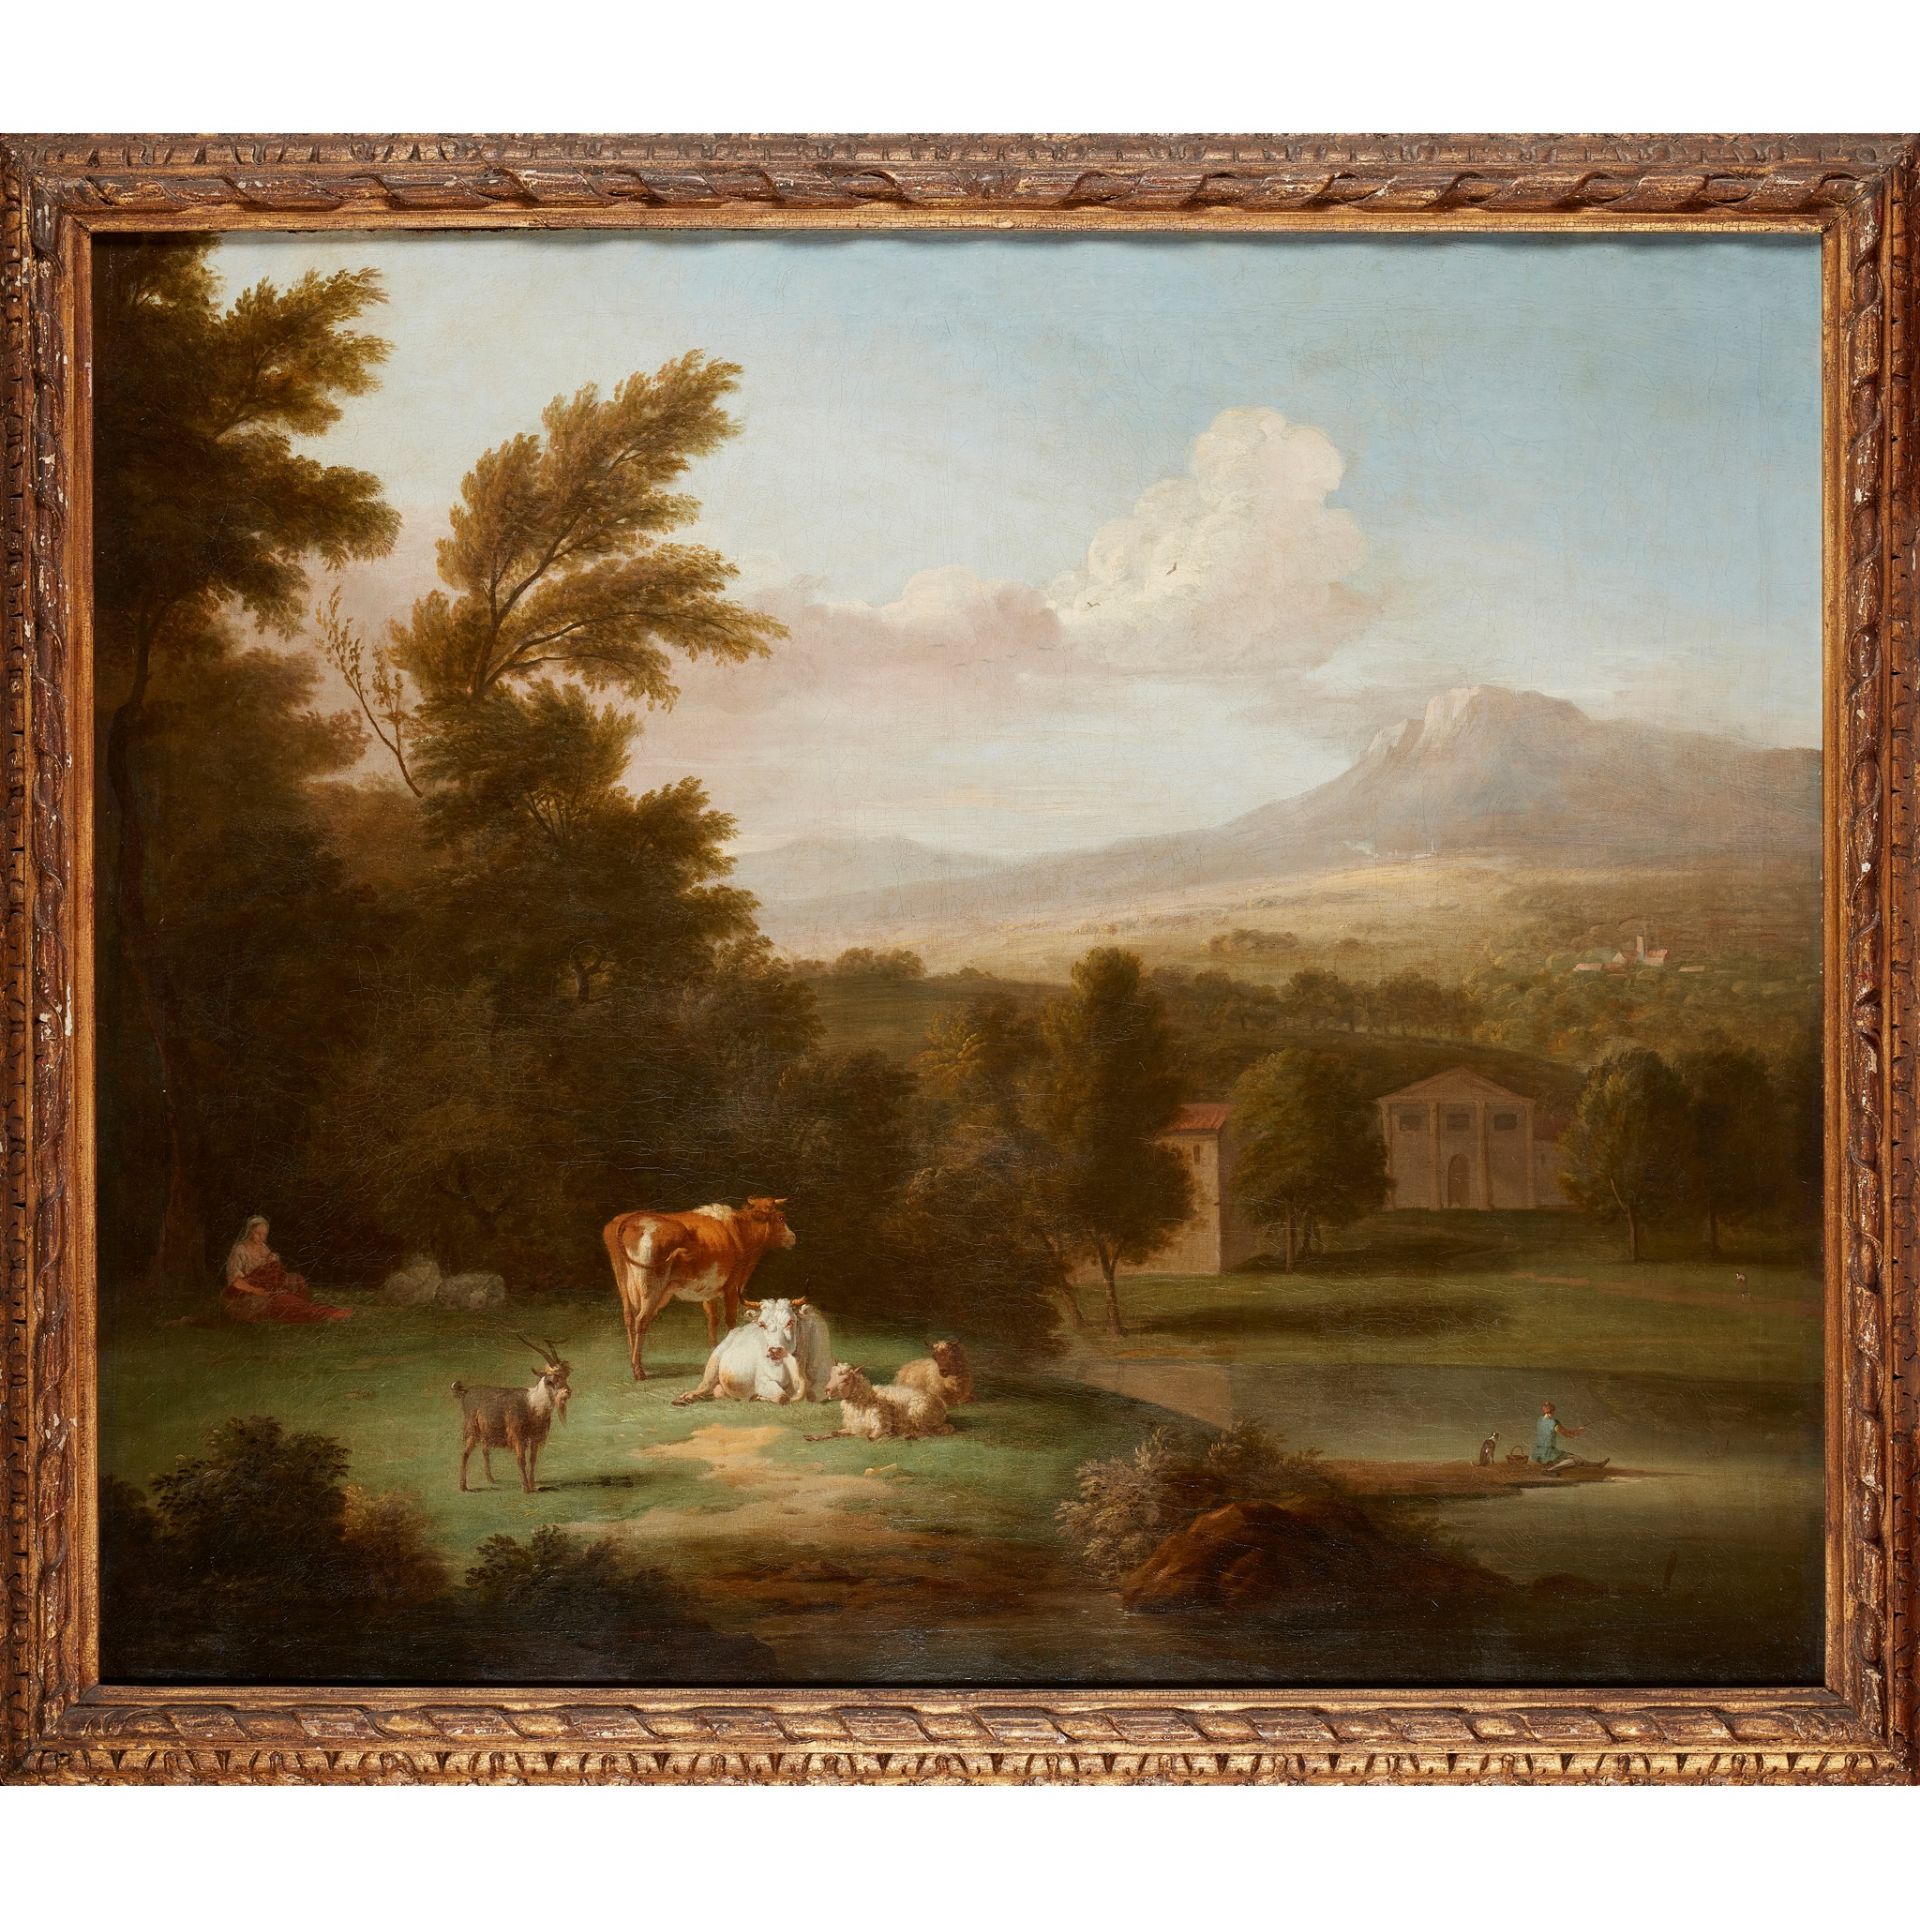 CHARLES CATTON THE ELDER R.A (BRITISH 1728-1798) AN ITALIANATE LANDSCAPE WITH SHEPHERDESS TENDING - Image 2 of 3